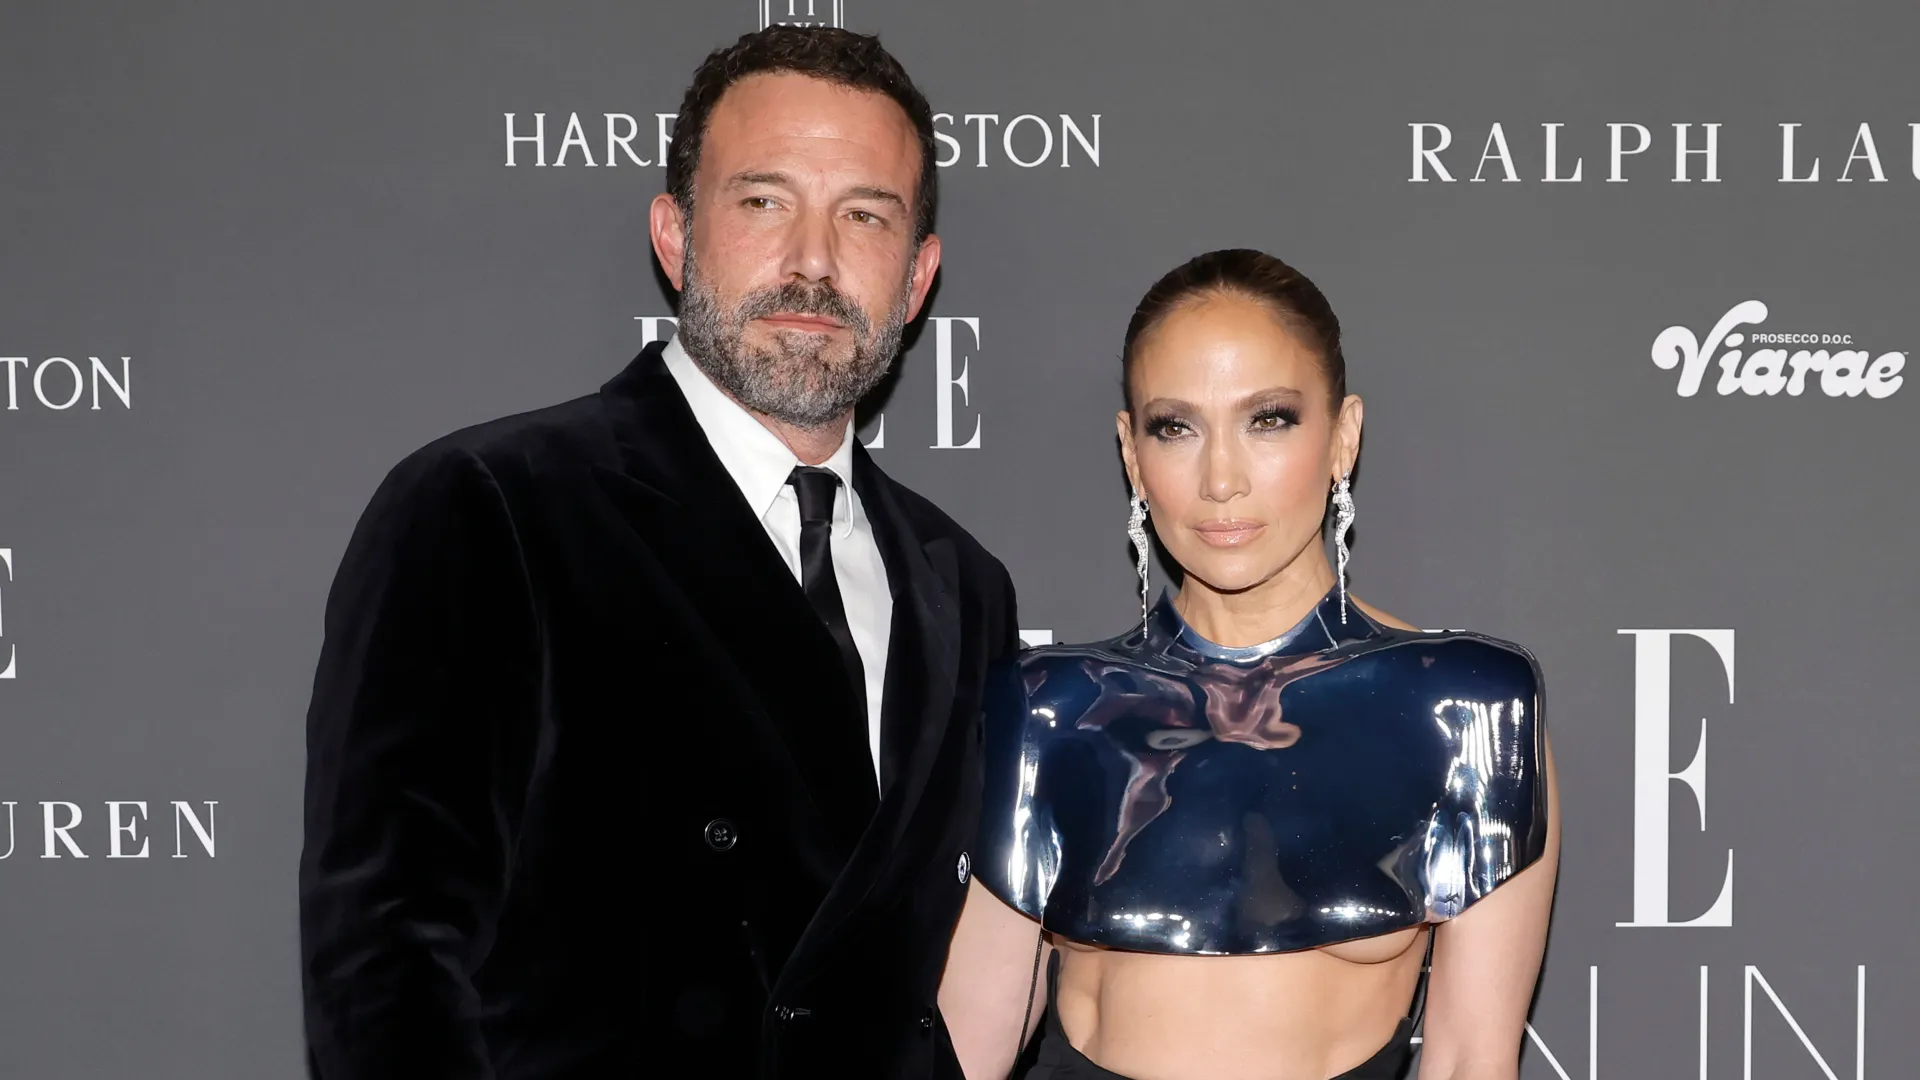 Jennifer Lopez and Ben Affleck Are Reportedly ‘Headed for a Divorce,’ He ‘Already Moved Out’